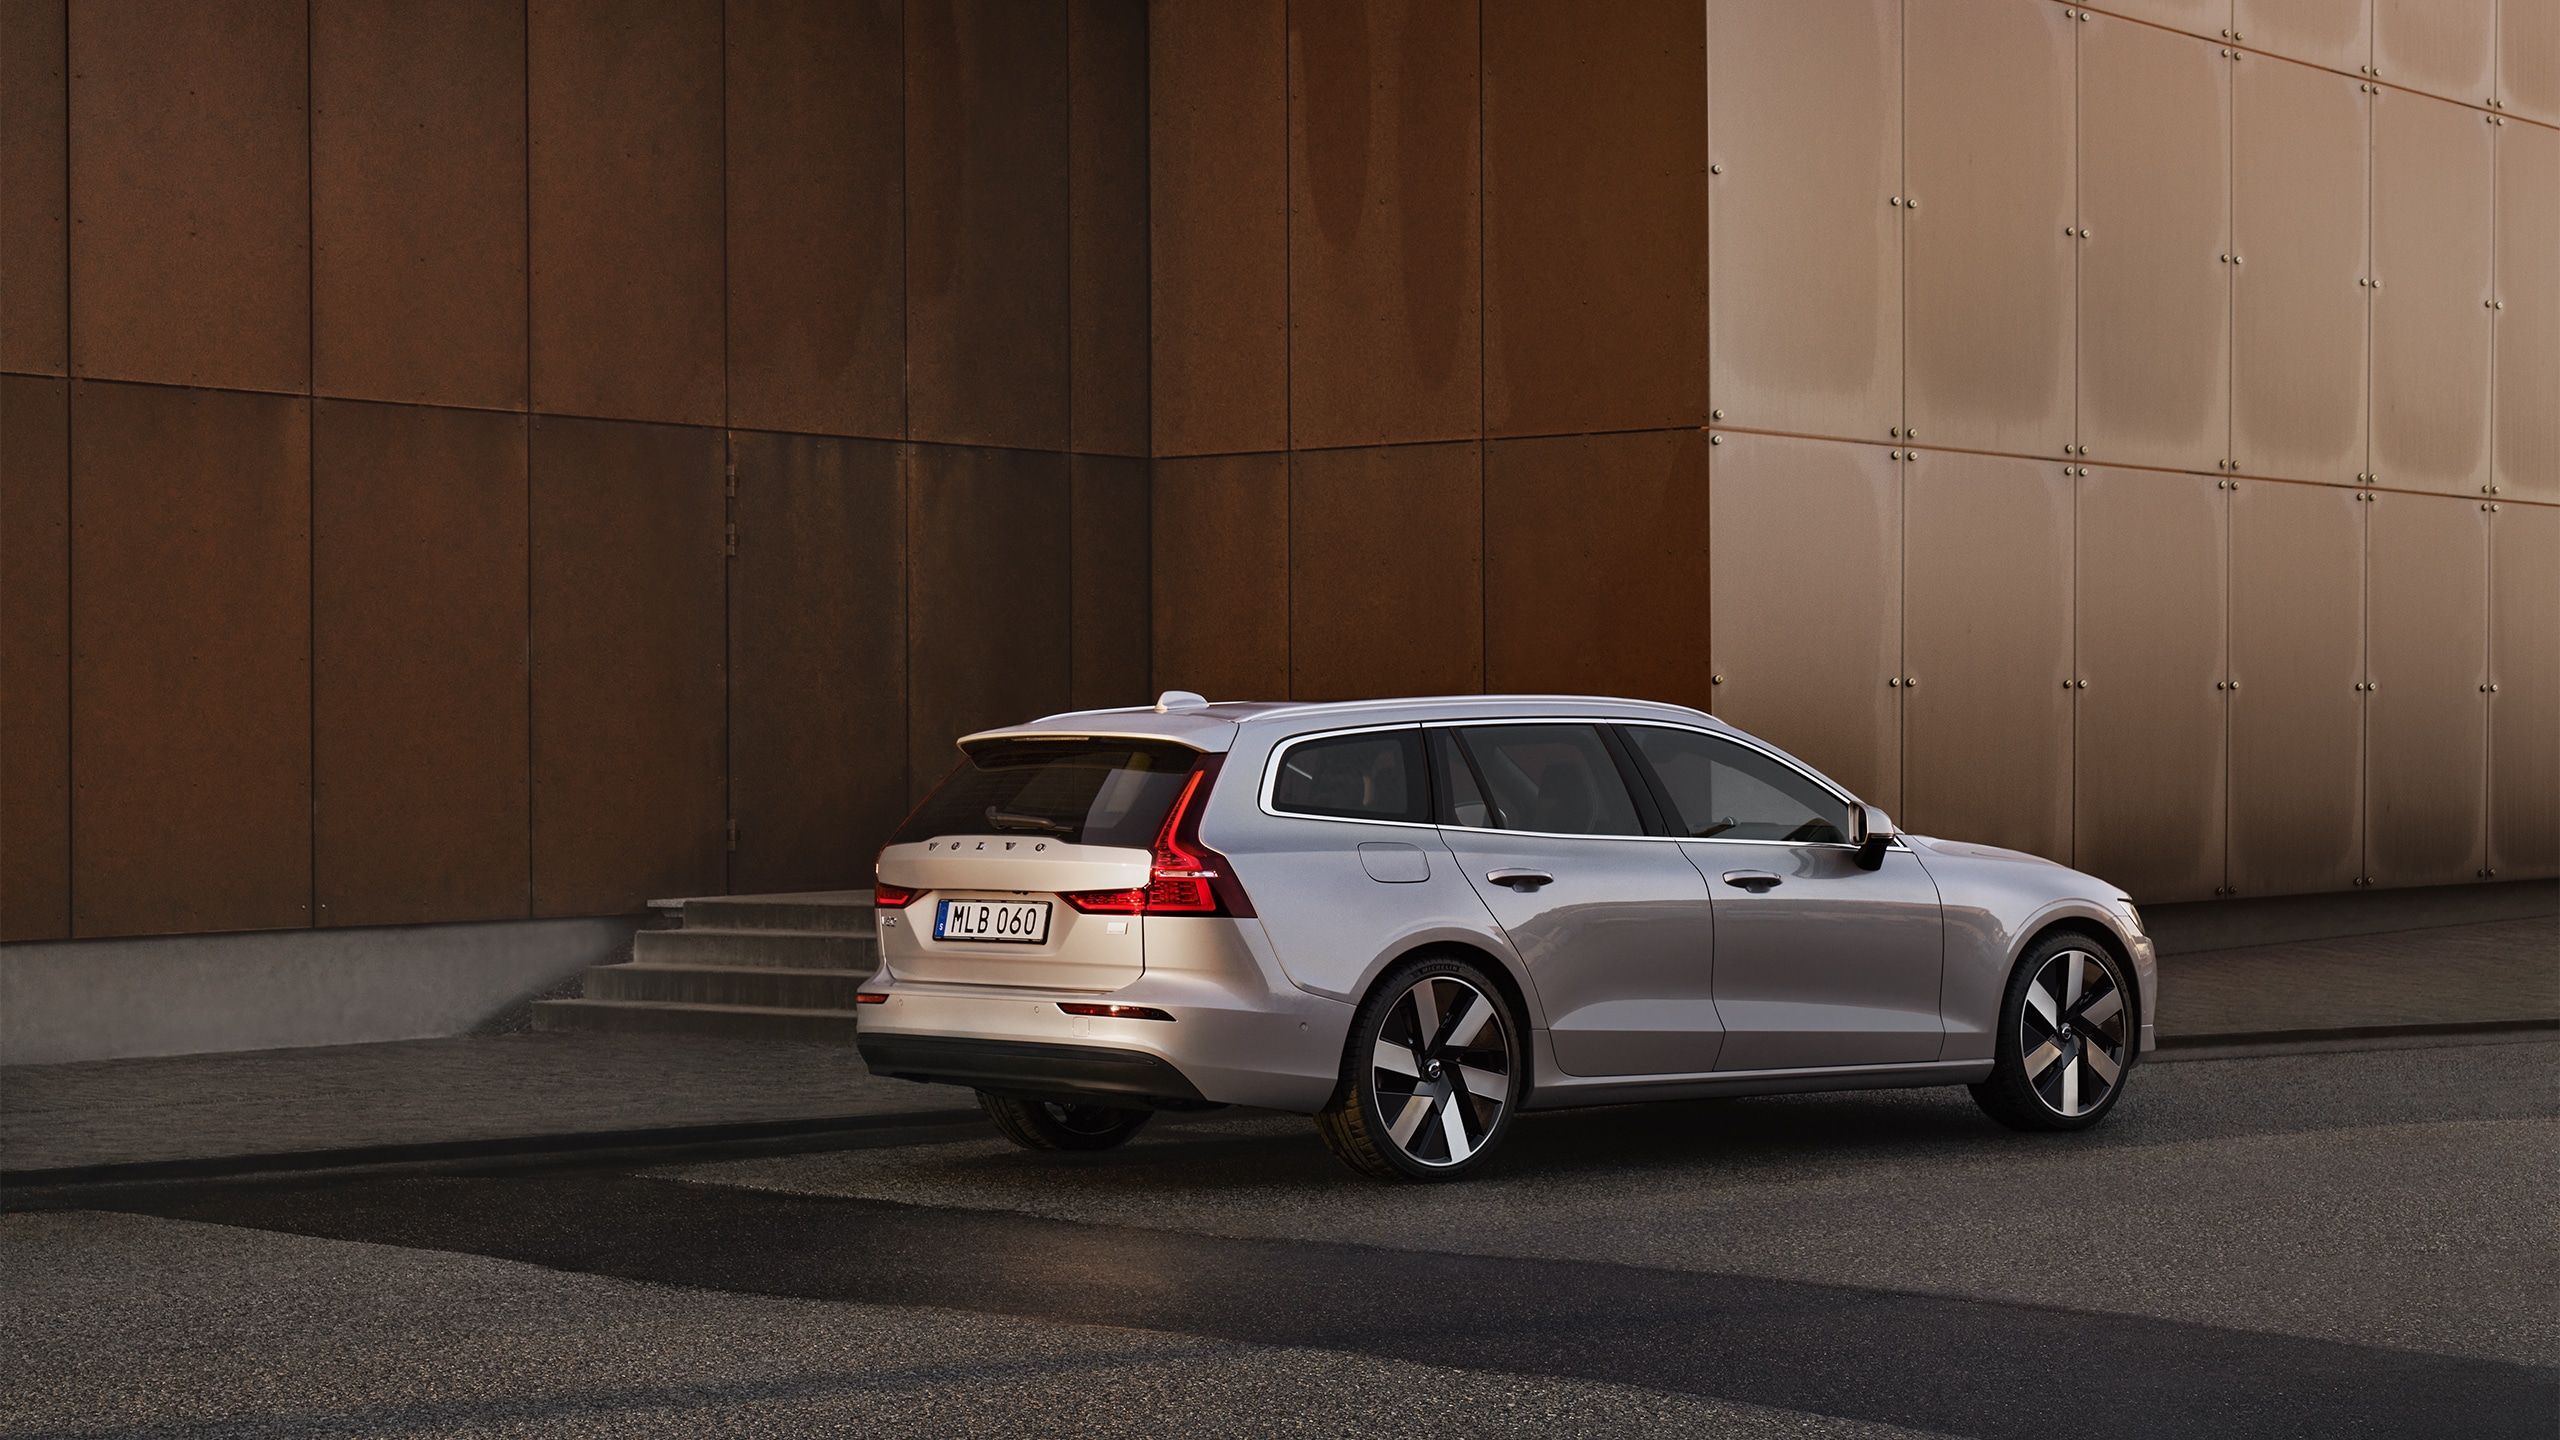 Exterior side and rear design of the Volvo V60 Recharge.